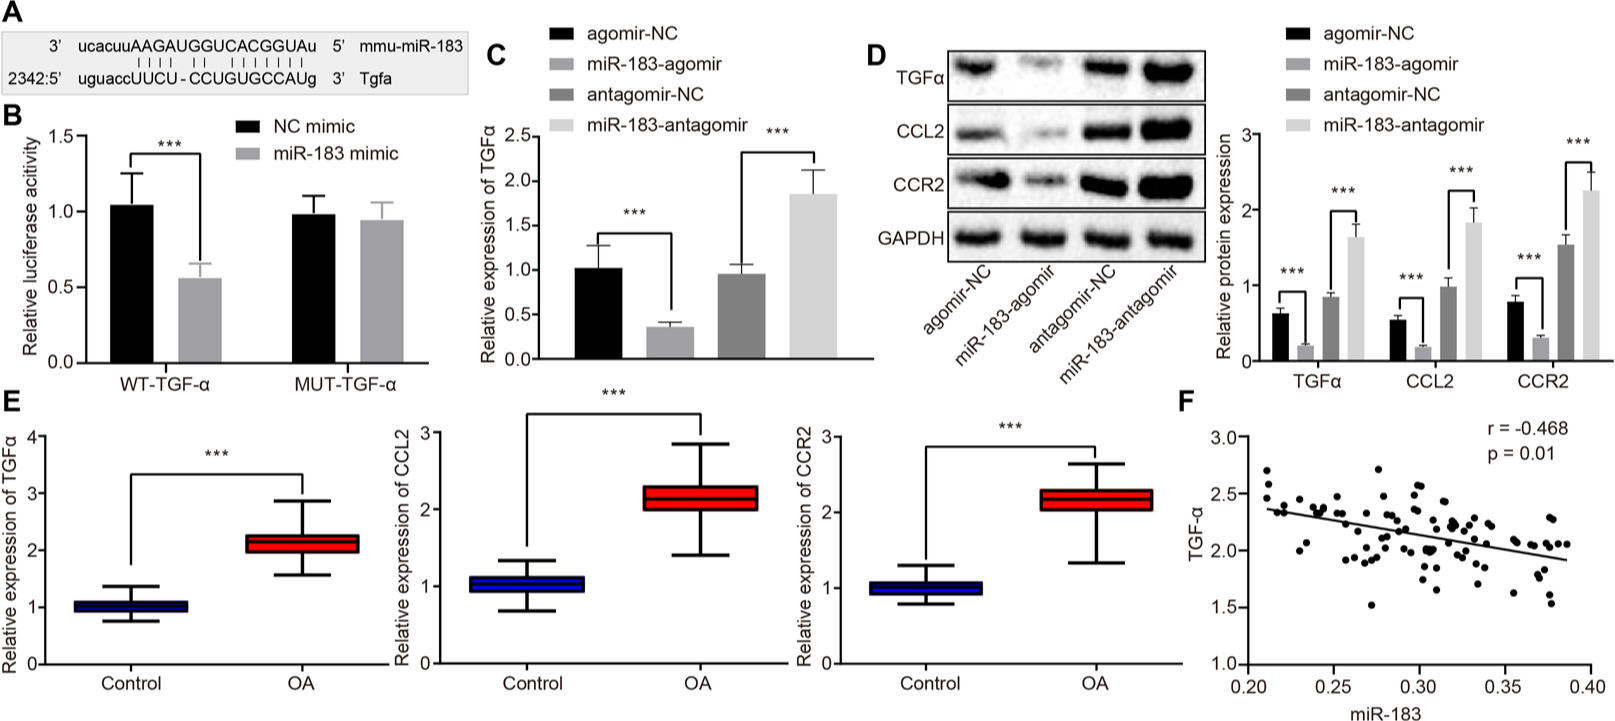 Fig. 3 
            Transforming growth factor α (TGFα) expression and C-C motif chemokine ligand 2 (CCL2)/C-C chemokine receptor type 2 (CCR2) signalling were inhibited by microRNA-183 (miR-183). a) Predicted miR-183 binding site in the TGFα three prime untranslated region (3'UTR). b) Dual luciferase reporter assay confirmed the direct binding of miR-183 and TGFα; the experiment was repeated three times. c) TGFα expression in mouse dorsal root ganglia (DRG) evaluated by quantitative reverse transcription polymerase chain reaction (RT-qPCR); n = 8 mice in each group. d) Representative images and quantitative analysis of immunoblotting of TGFα, CCL2, and CCR2 levels in mouse DRG; n = 8 mice in each group. e) Relative TGFα, CCL2, and CCR2 messenger RNA (mRNA) levels measured by RT-qPCR in samples from patients with osteoarthritis (OA); n = 95 patients. f) Correlation analysis of TGFα and miR-183 expression in patients with OA; n = 95 patients. ***p < 0.001. The results were measurement data, and expressed as means (standard deviation (SD)). Comparisons between two unpaired groups were analyzed using the independent-samples t-test. Comparisons among multiple groups were analyzed by analysis of variance (ANOVA), followed by Tukey’s post hoc test. GAPDH, glyceraldehyde-3-phosphate dehydrogenase; MUT, mutated; NC, negative control; WT, wild-type.
          